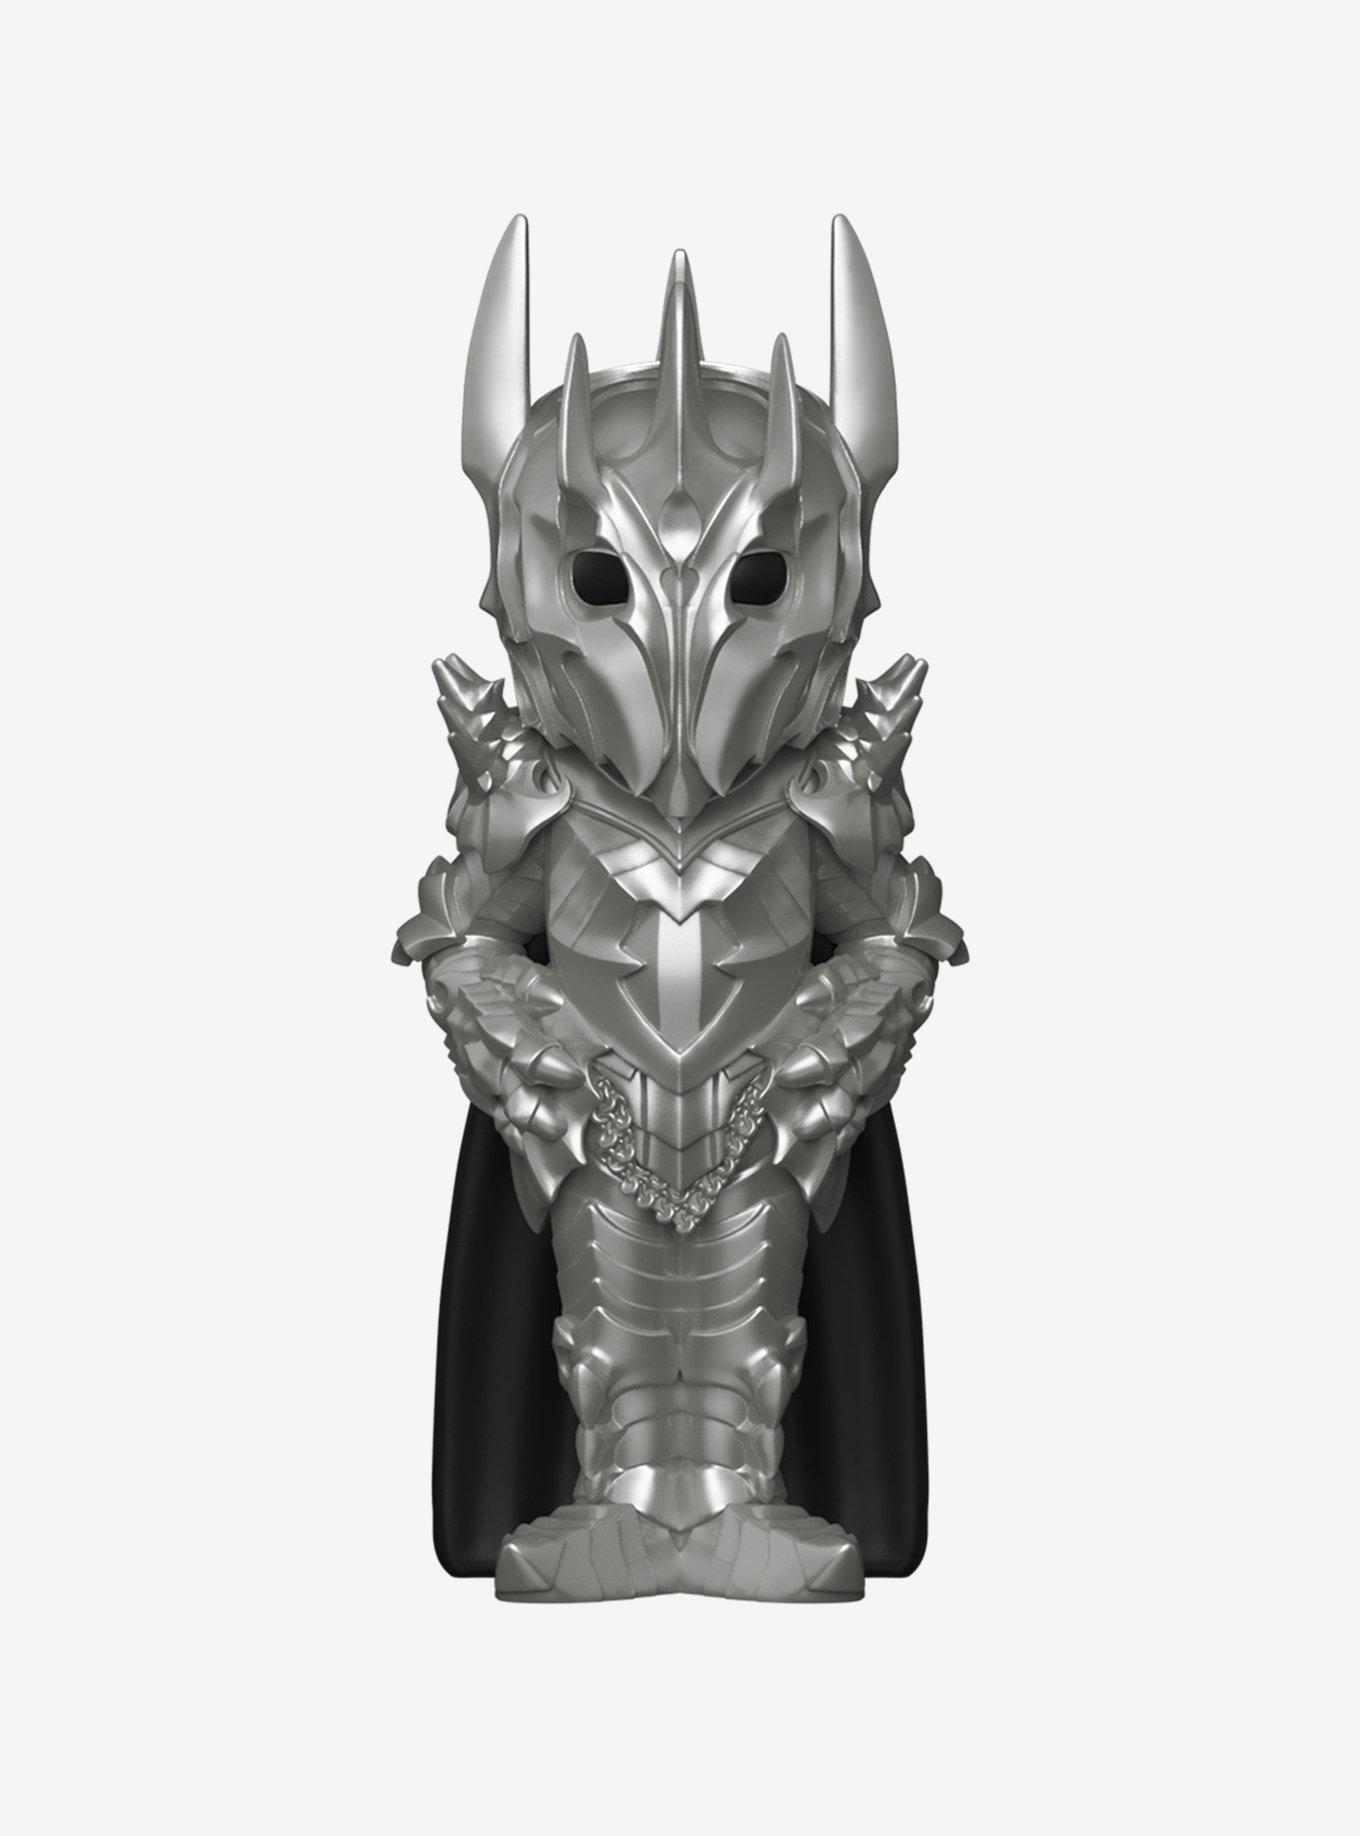 Funko Rewind Lord of the Rings Sauron Vinyl Figure, , hi-res